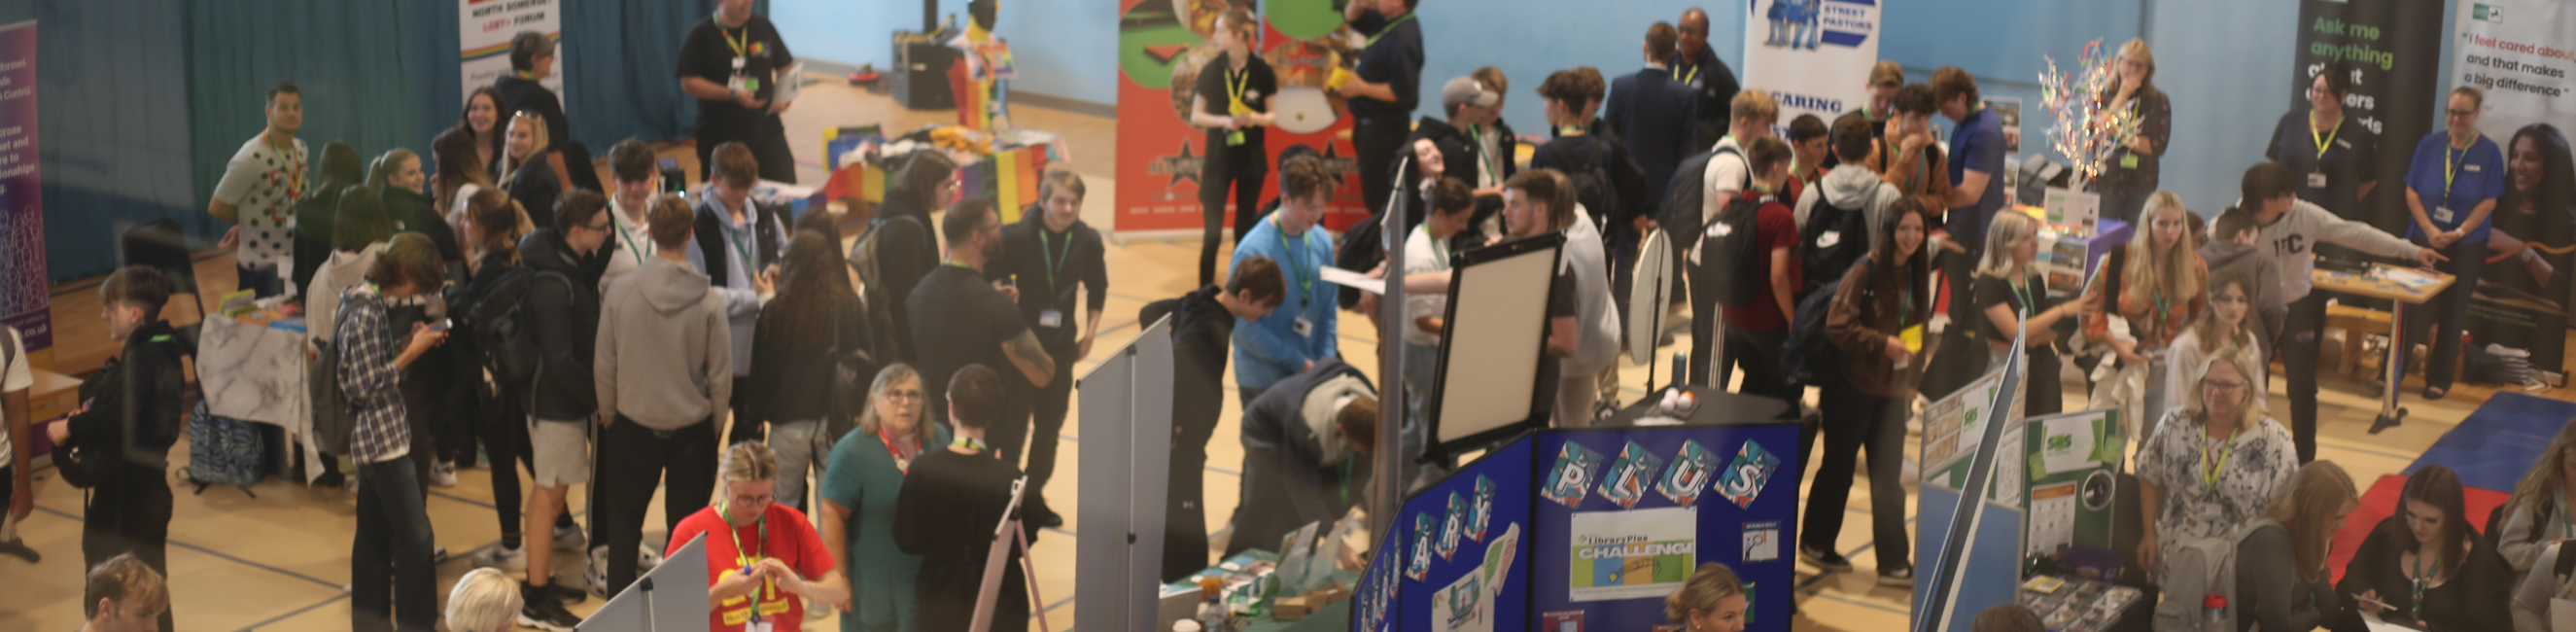 View of Freshers Fair from above